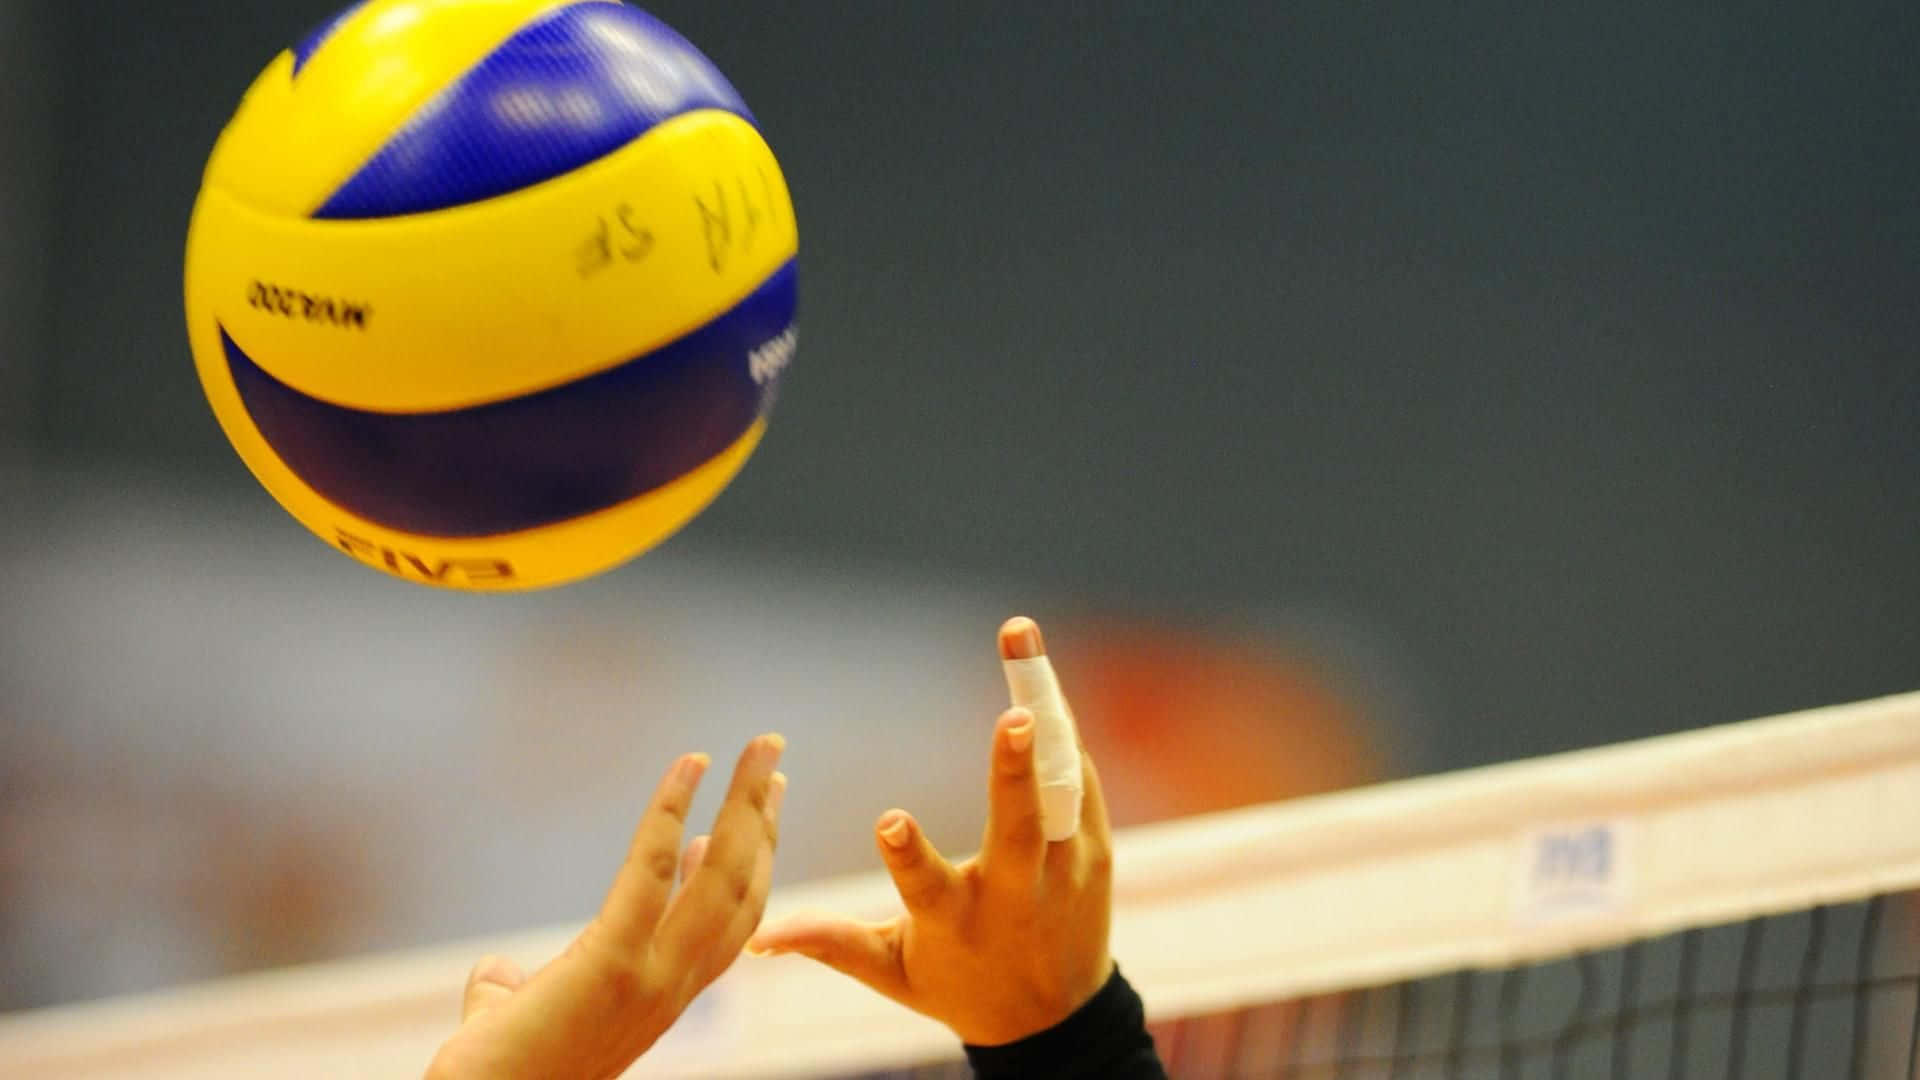 A Person Catching A Volleyball Ball In A Game